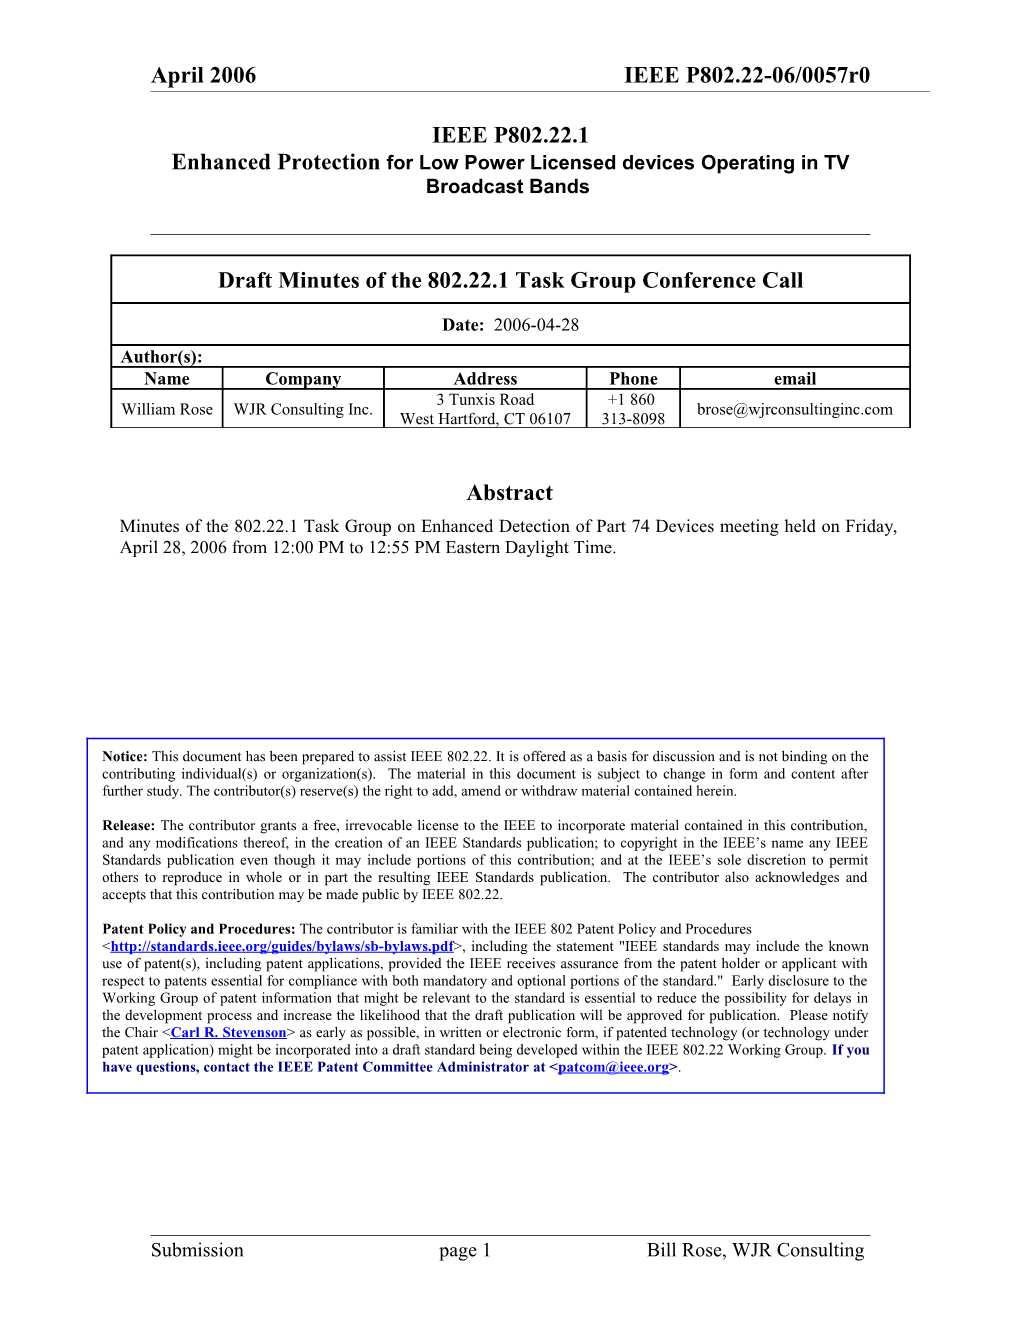 IEEE P802.22.1 Enhanced Protection for Low Power Licensed Devices Operating in TV Broadcast